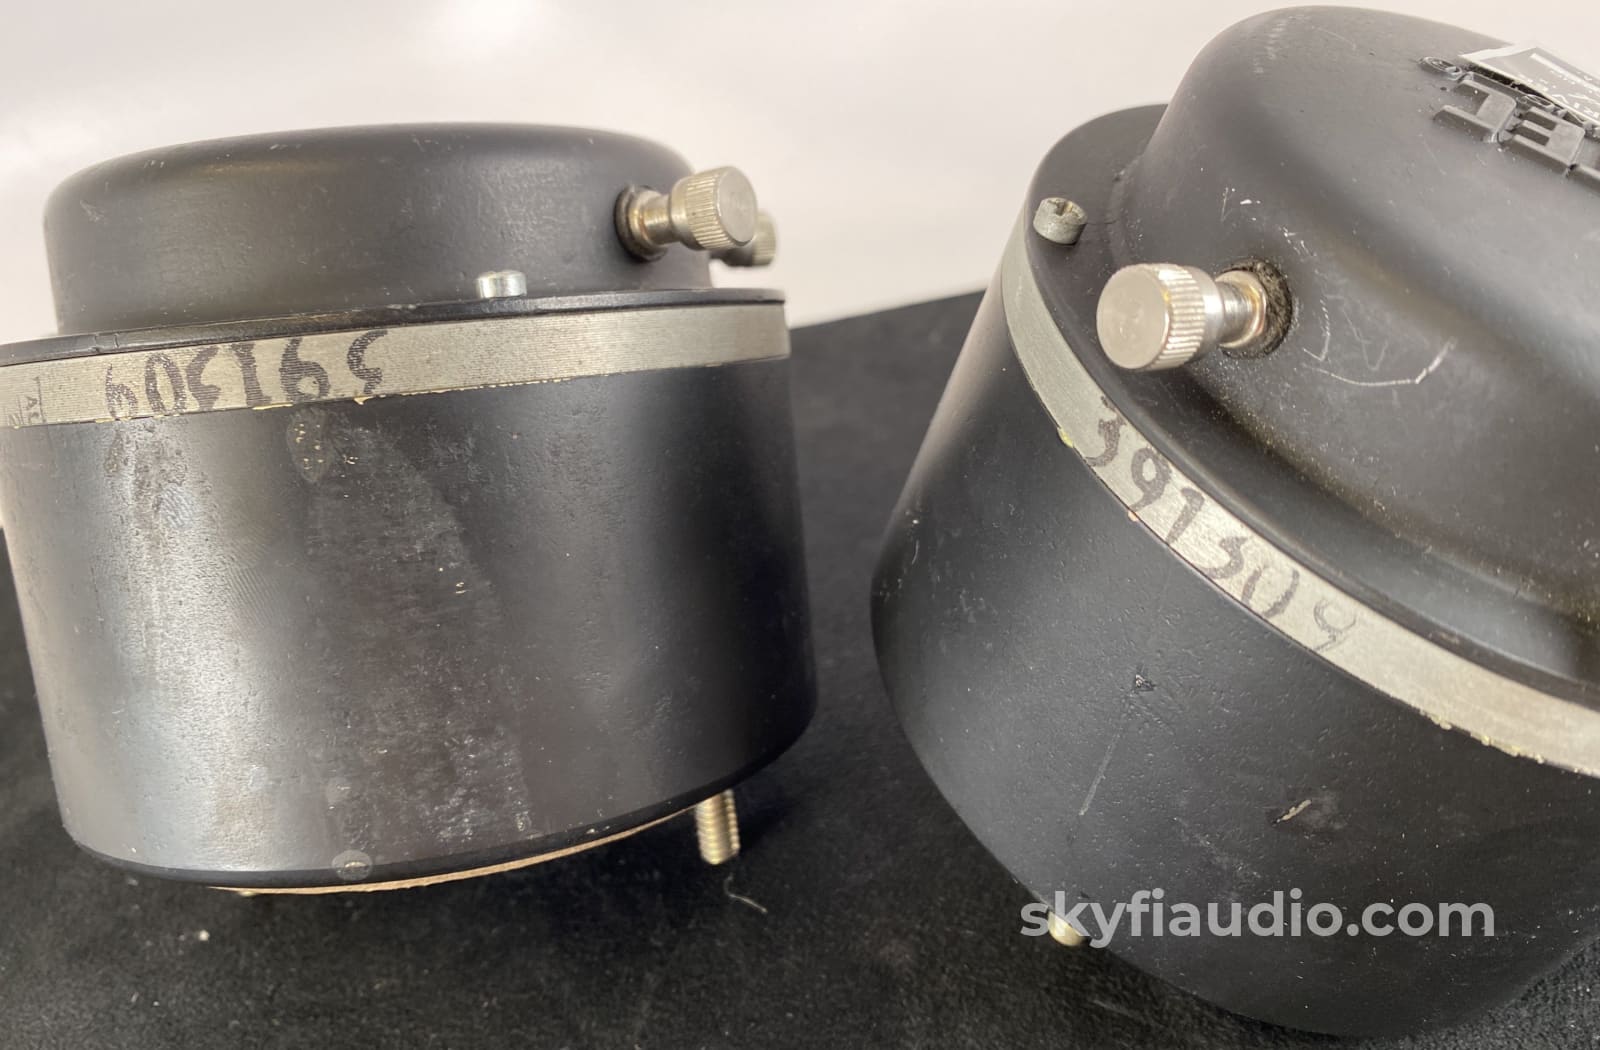 Altec Lansing 802-8D Driver Pair With Matching Date Codes - Super Rare Speakers